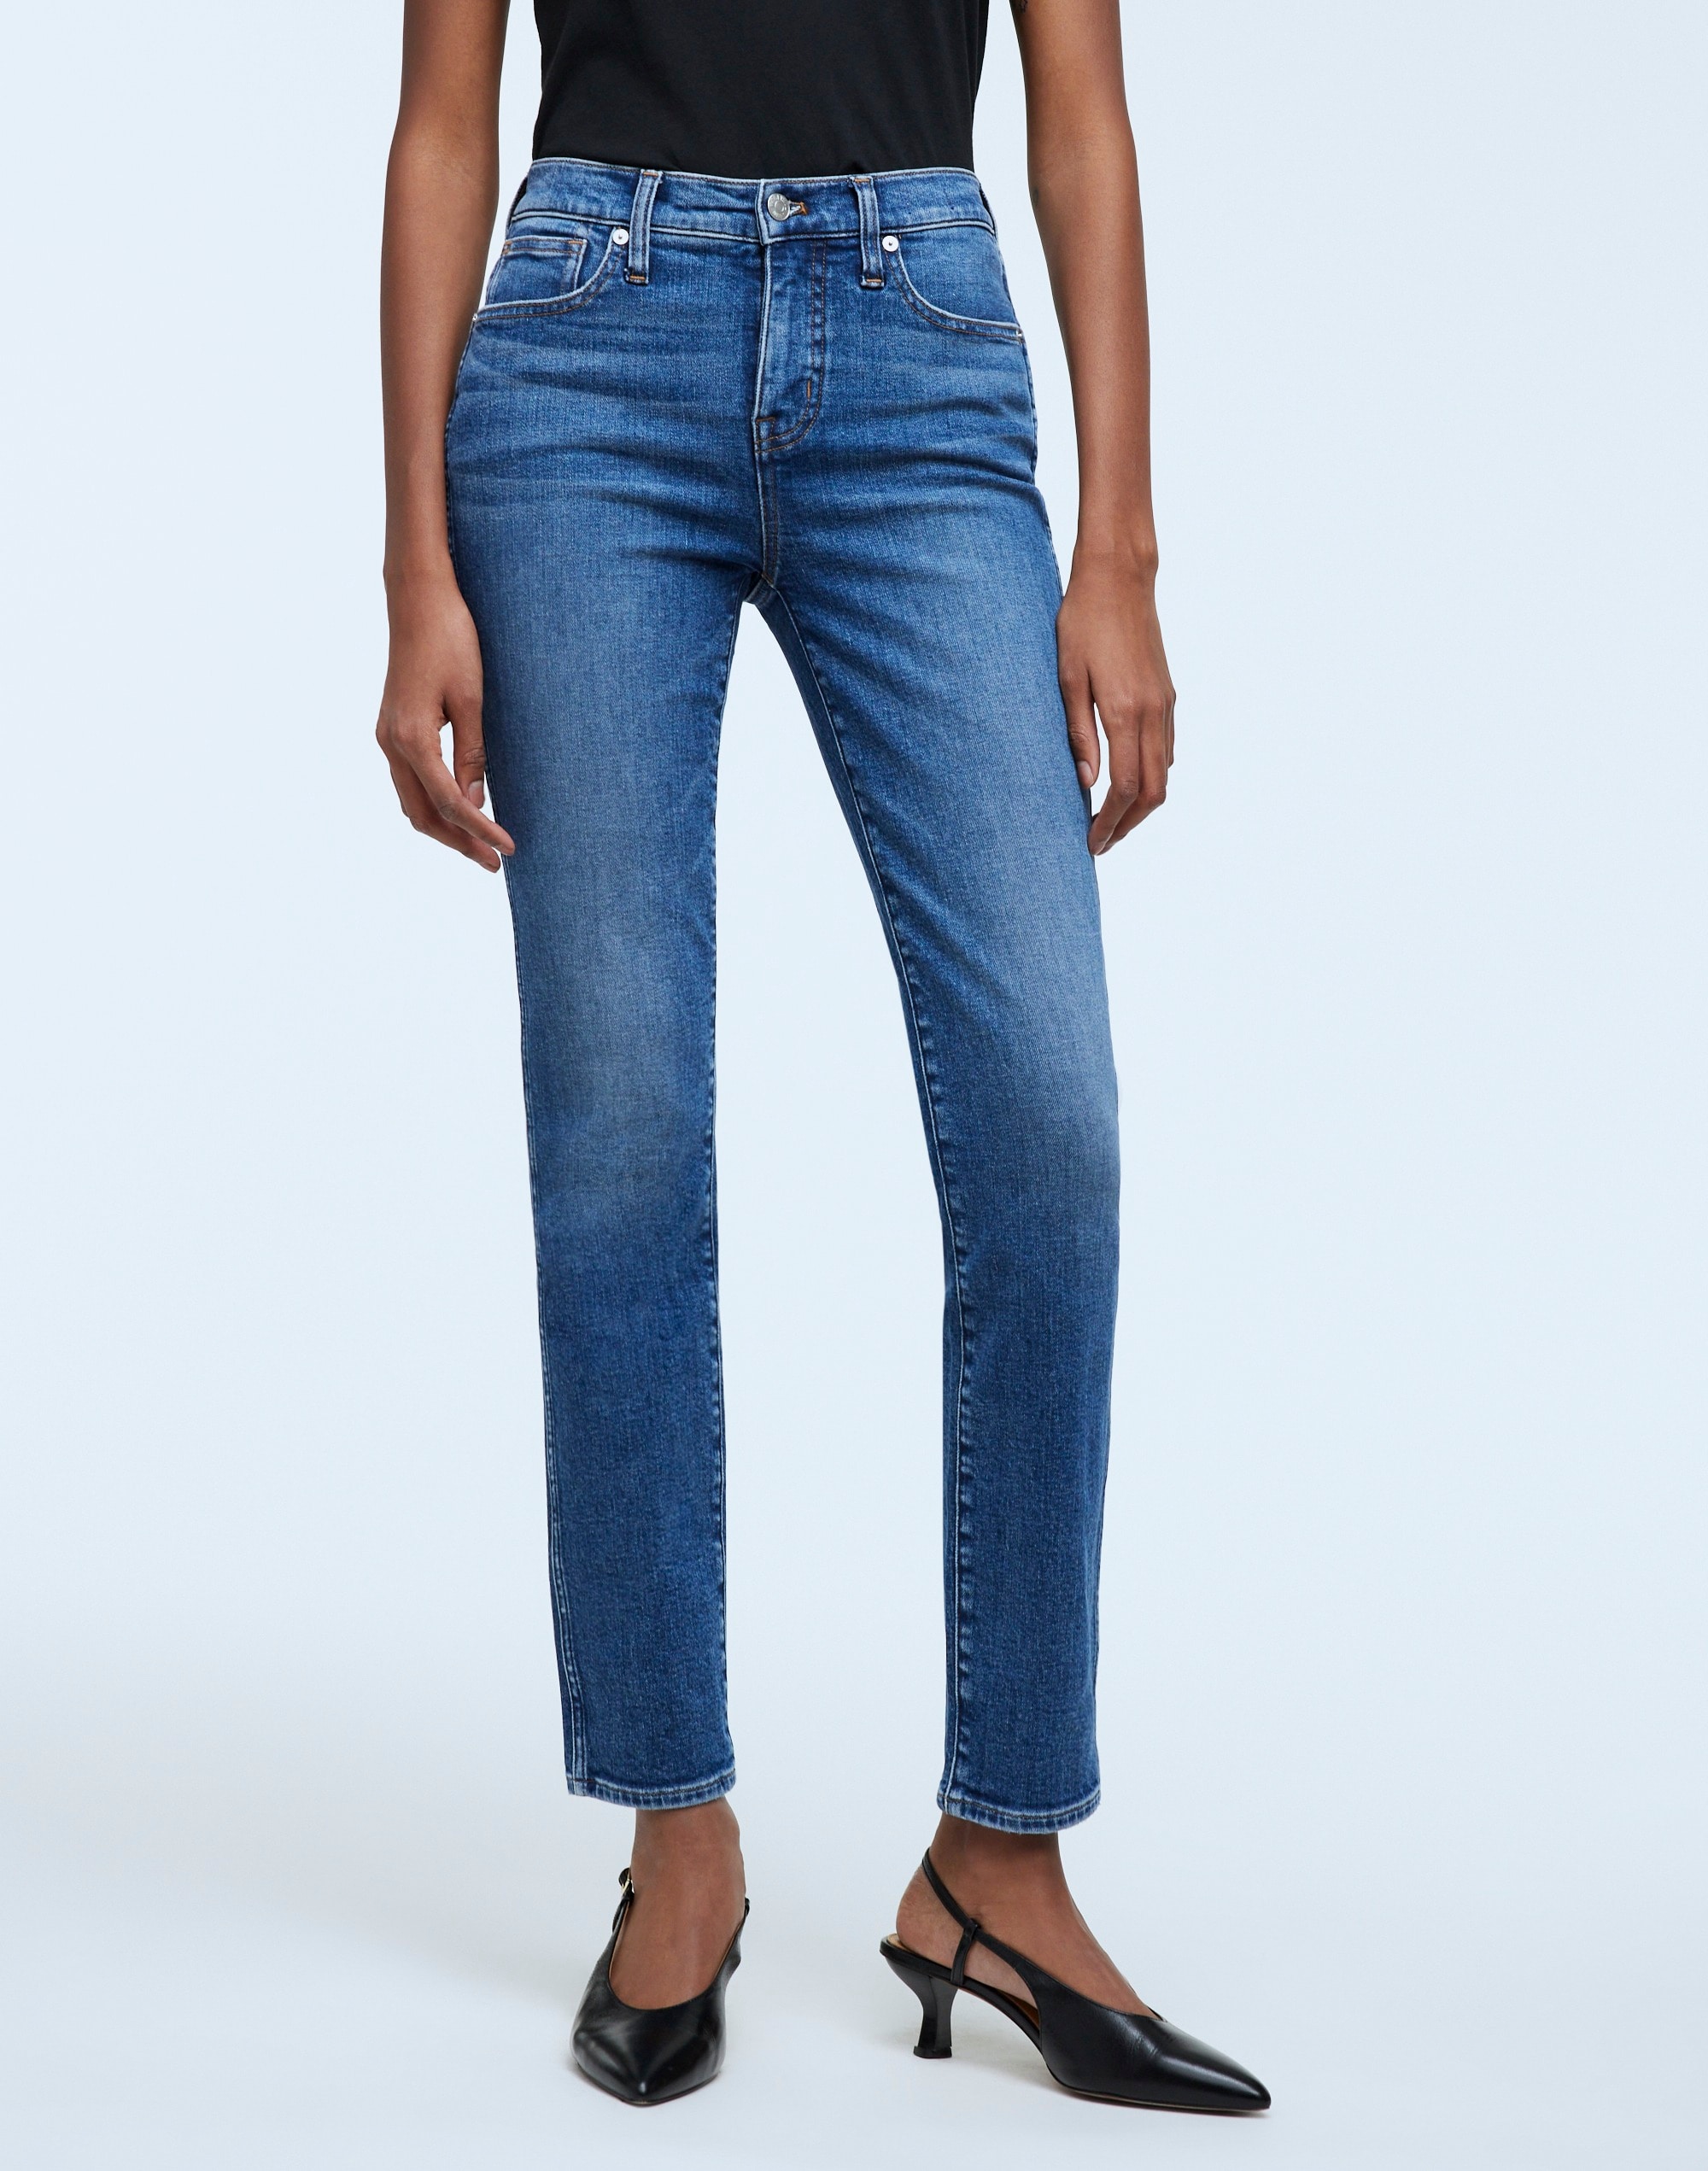 Stovepipe Jeans Drifthaven Wash